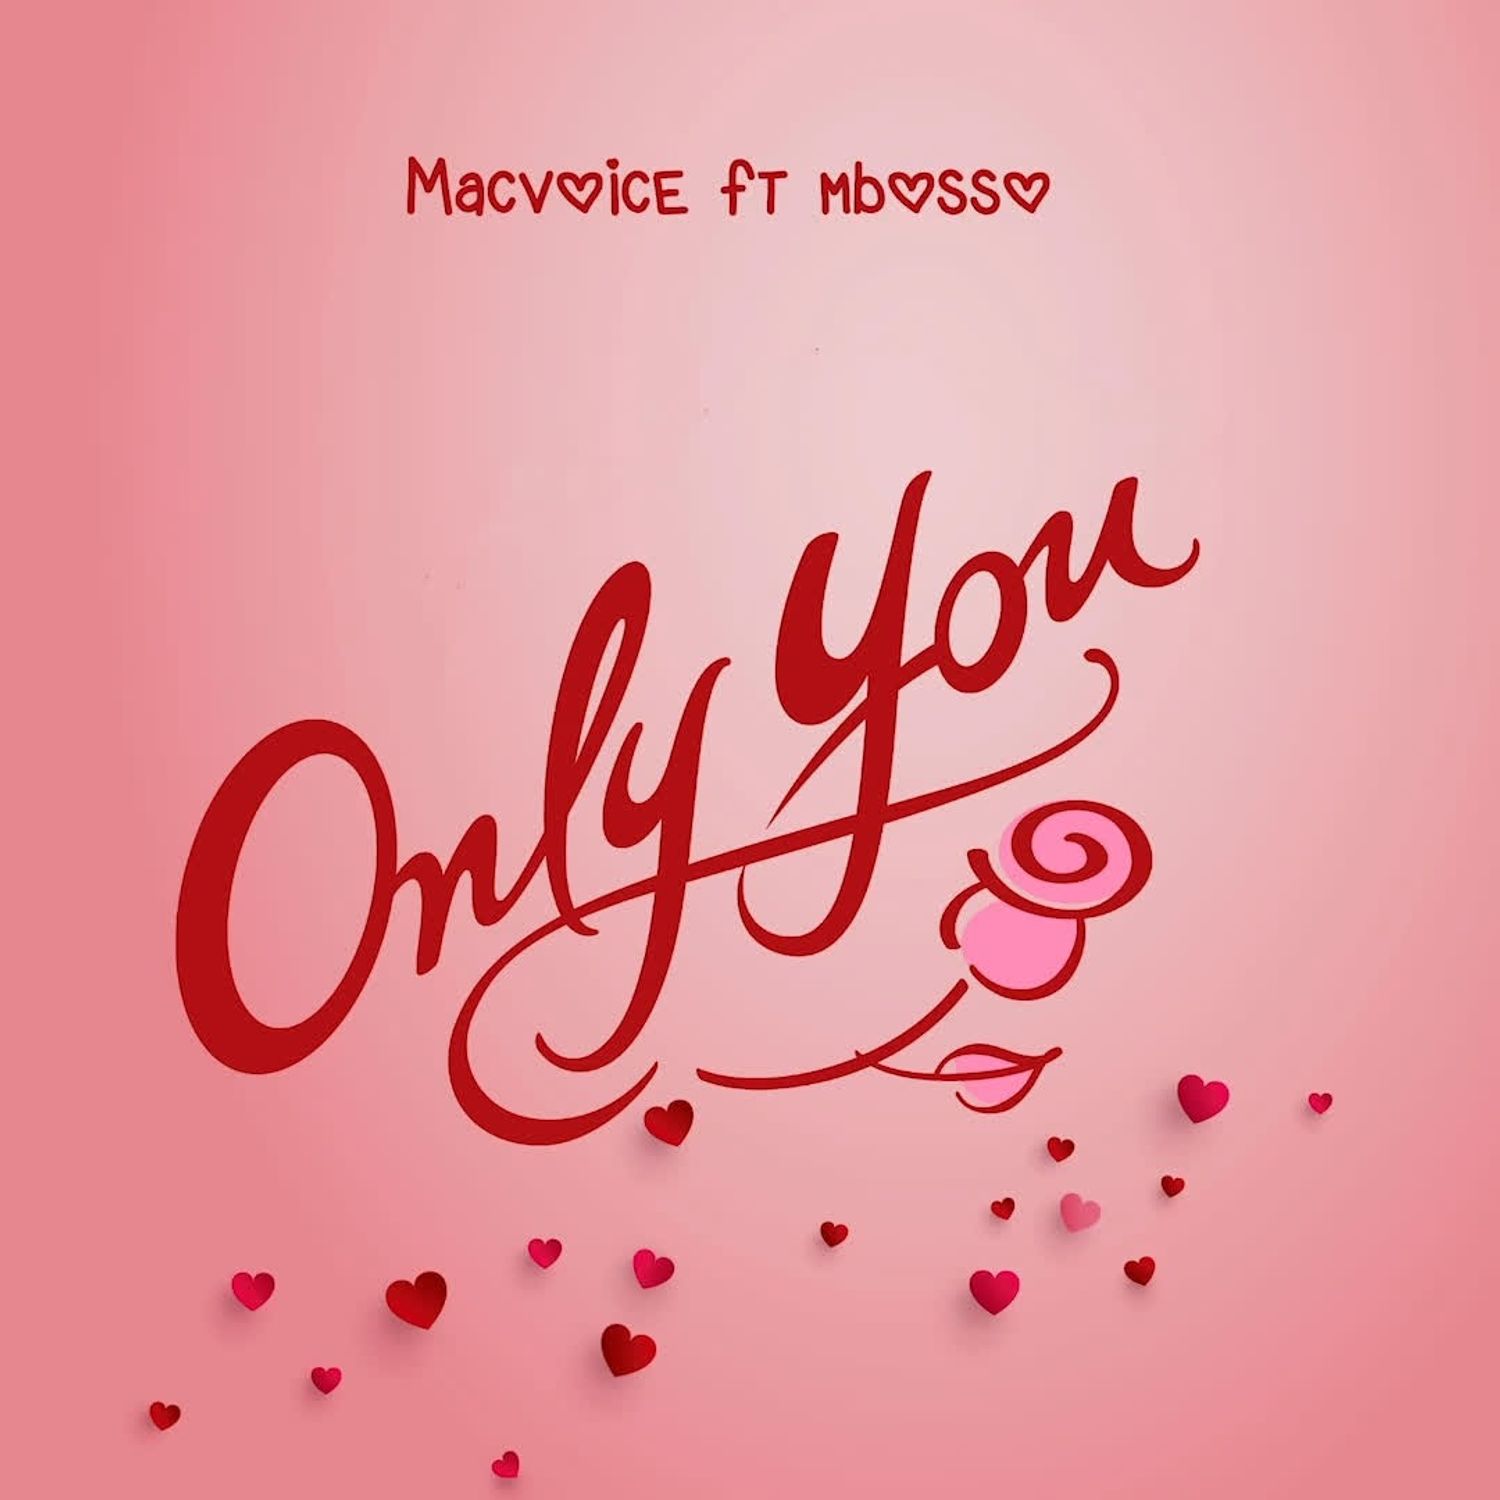 Macvoice Ft Mbosso - Only You